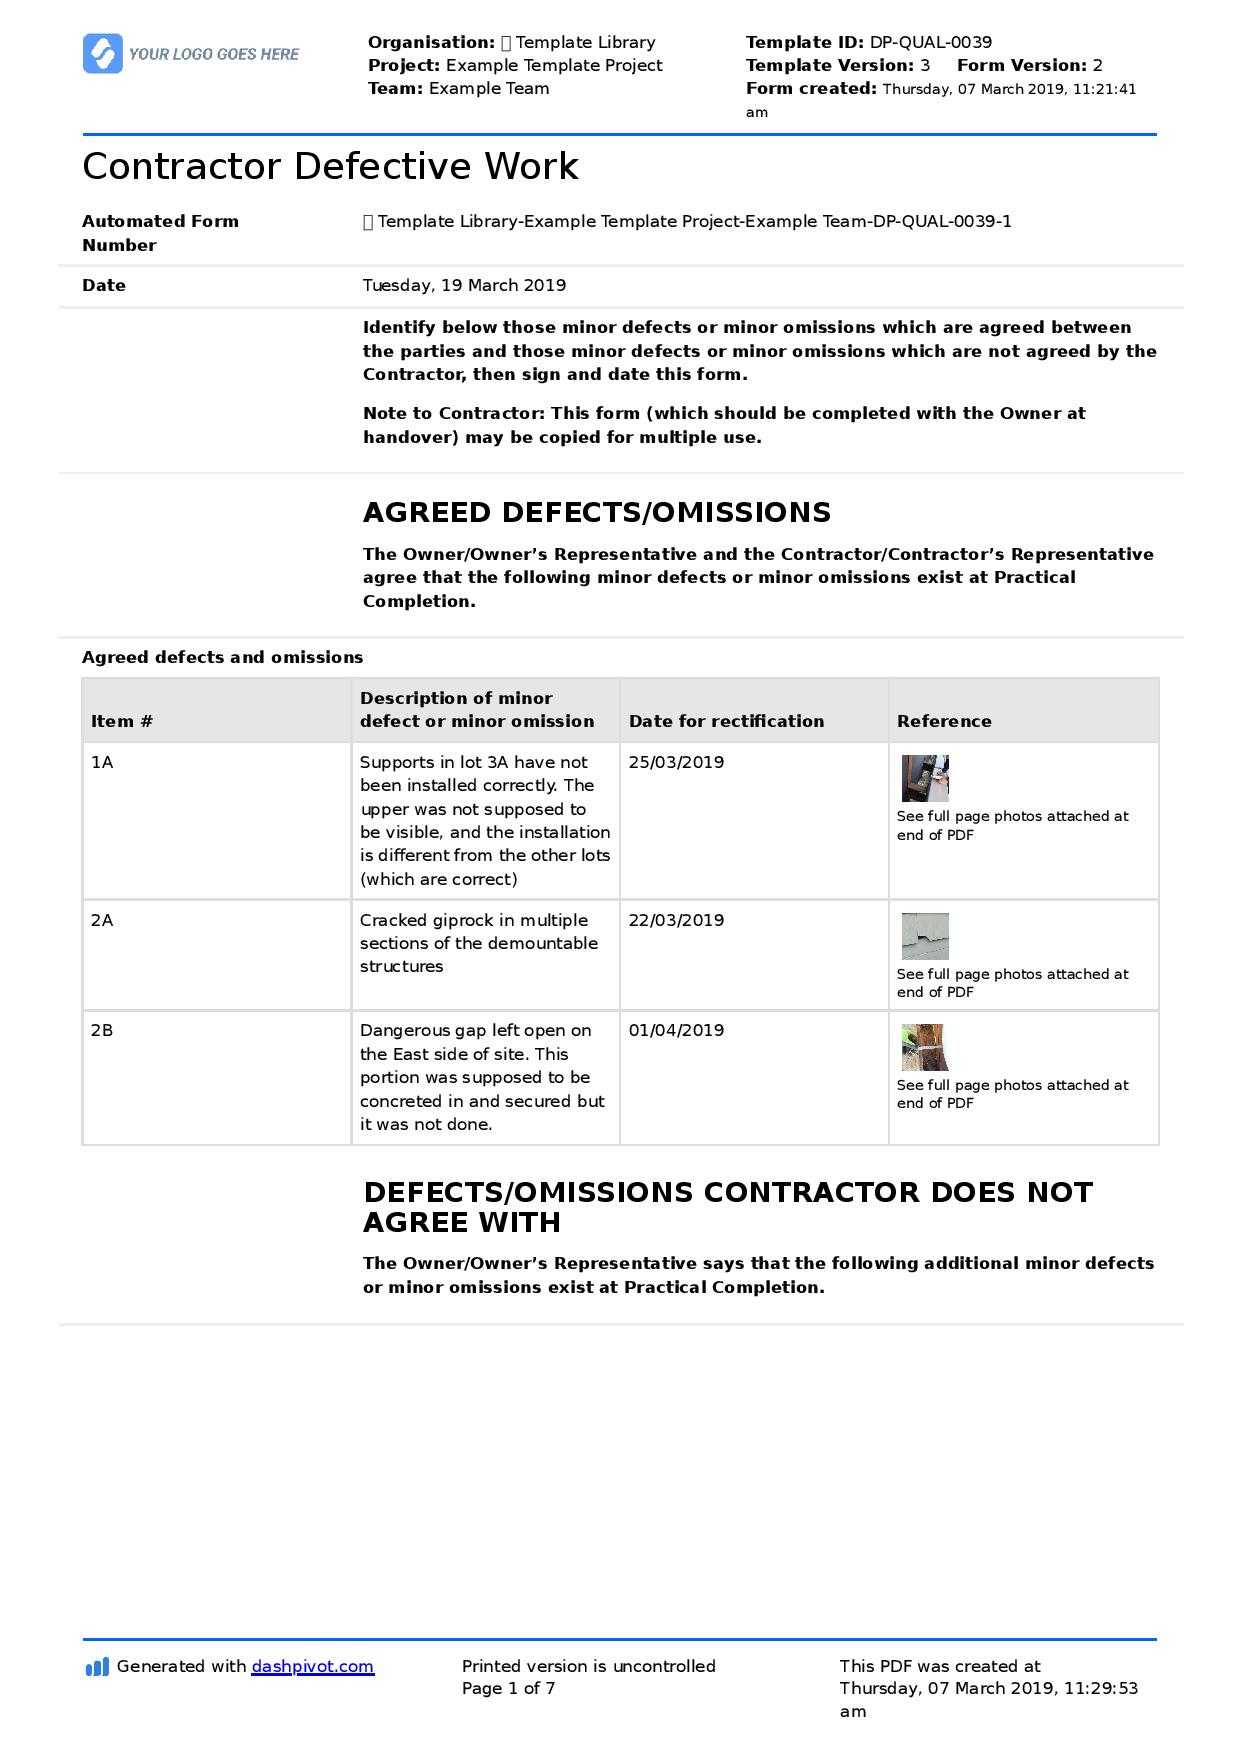 Letter To Contractor For Defective Work: Sample Letter And For Construction Deficiency Report Template